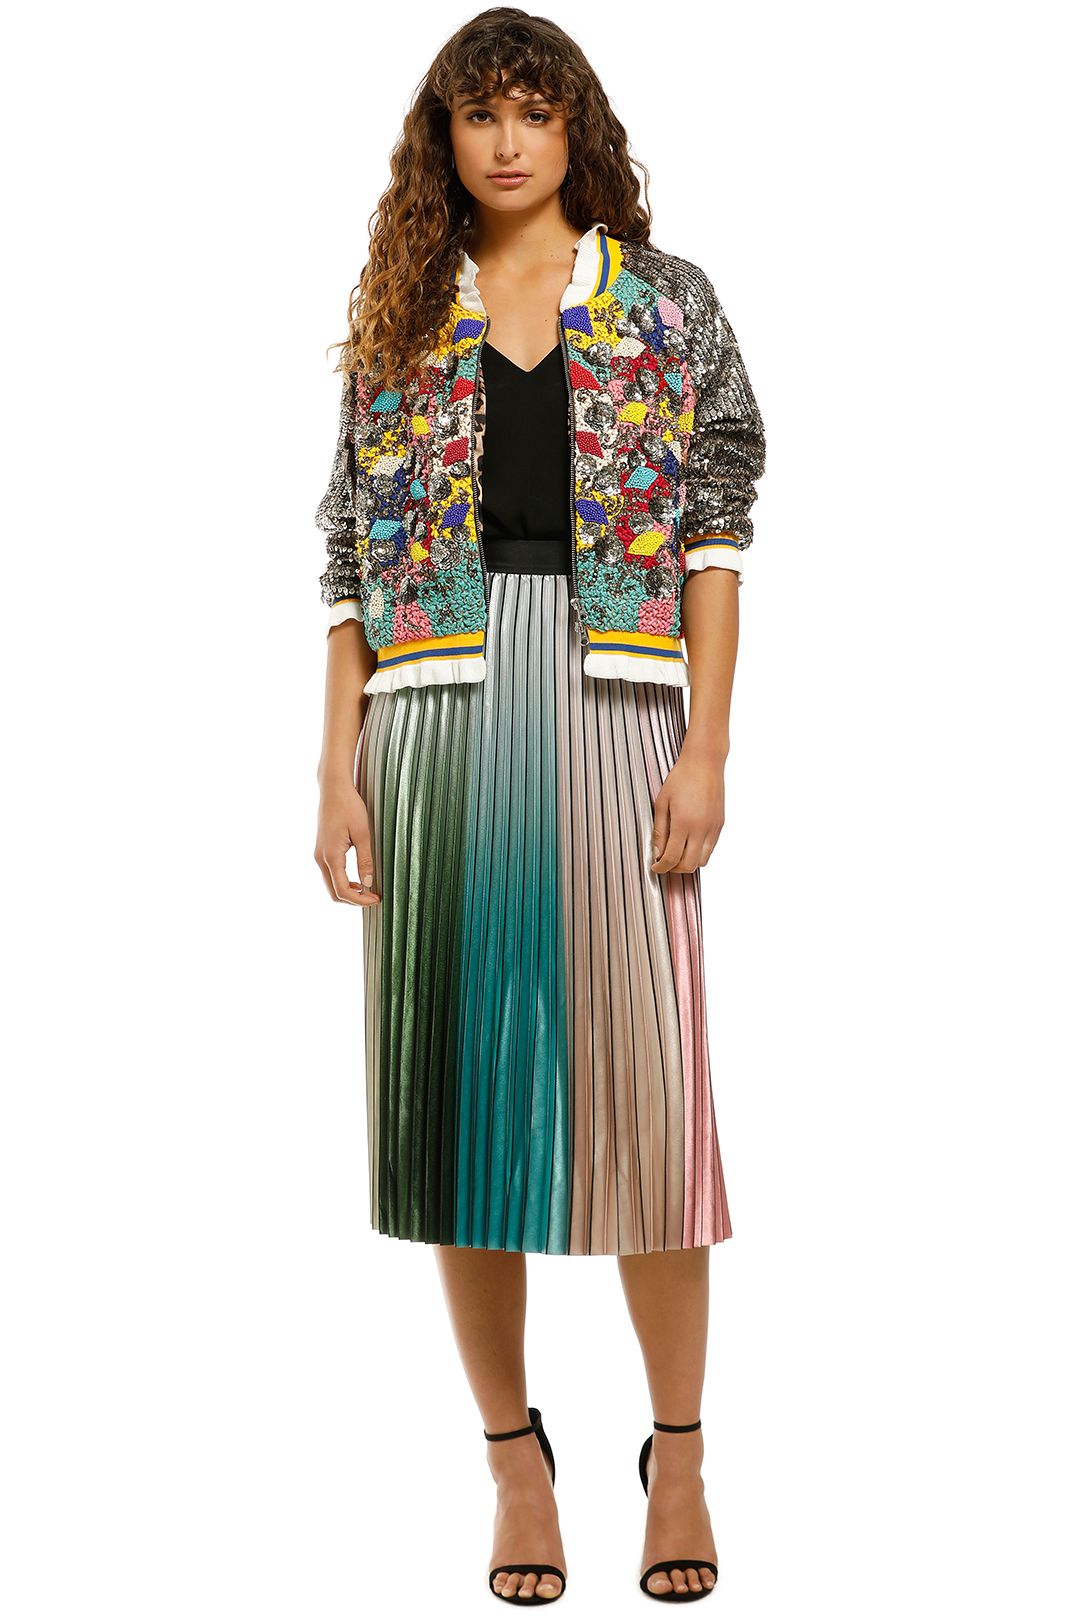 Trelise-Cooper-Love-And-Bomber-Jacket-Carnival-Front